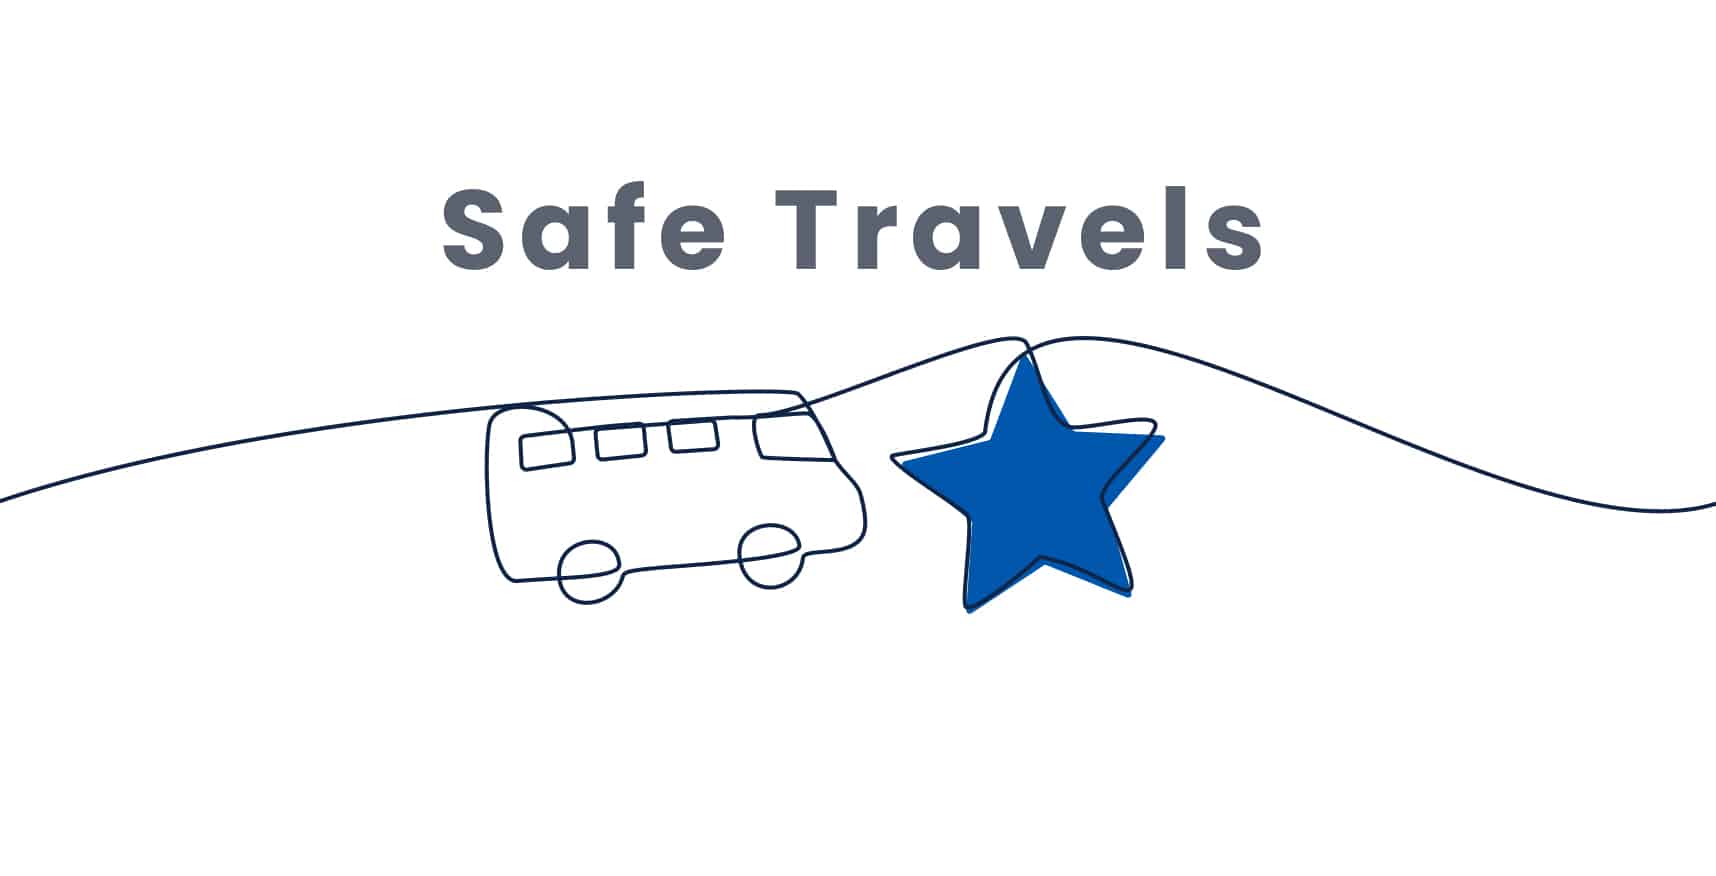 A simple line drawing of a bus and a blue star under the text "Safe Travels.